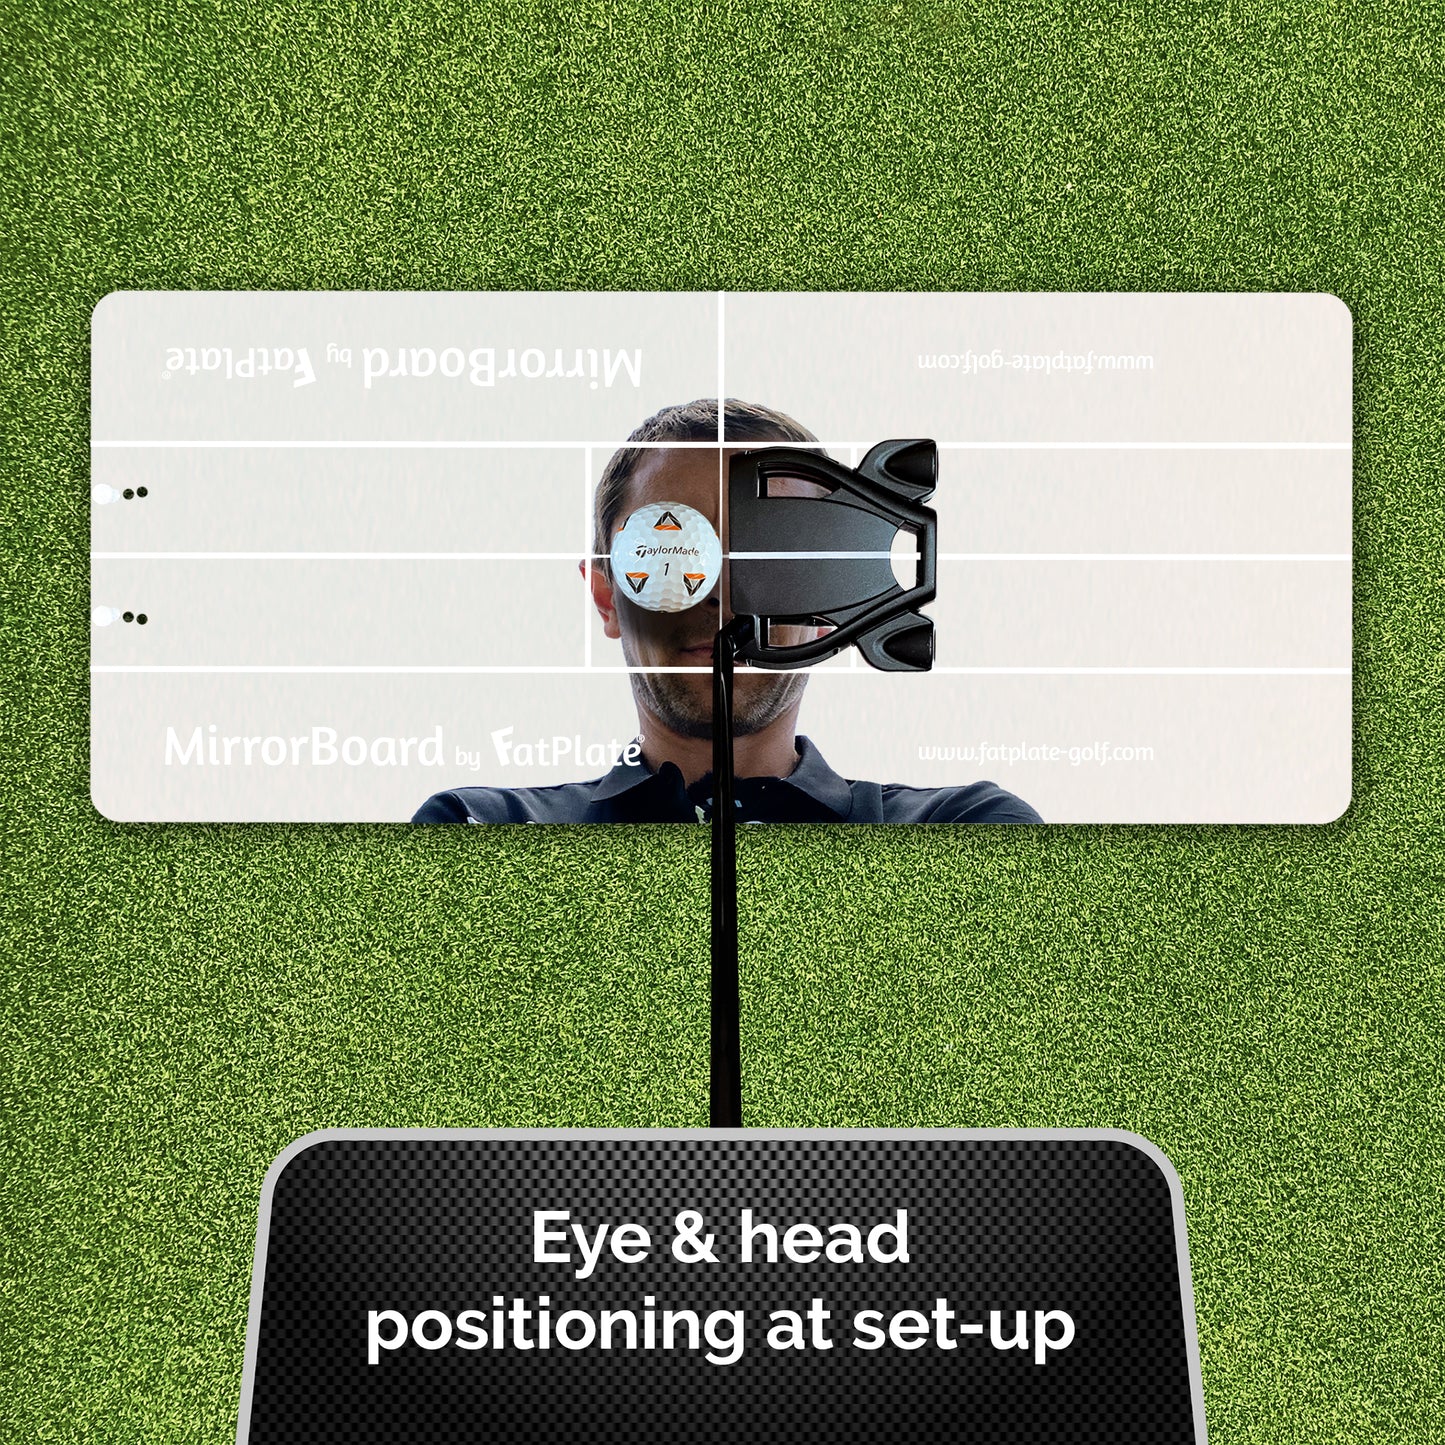 MirrorBoard - Swing and Putting Mirror (large)